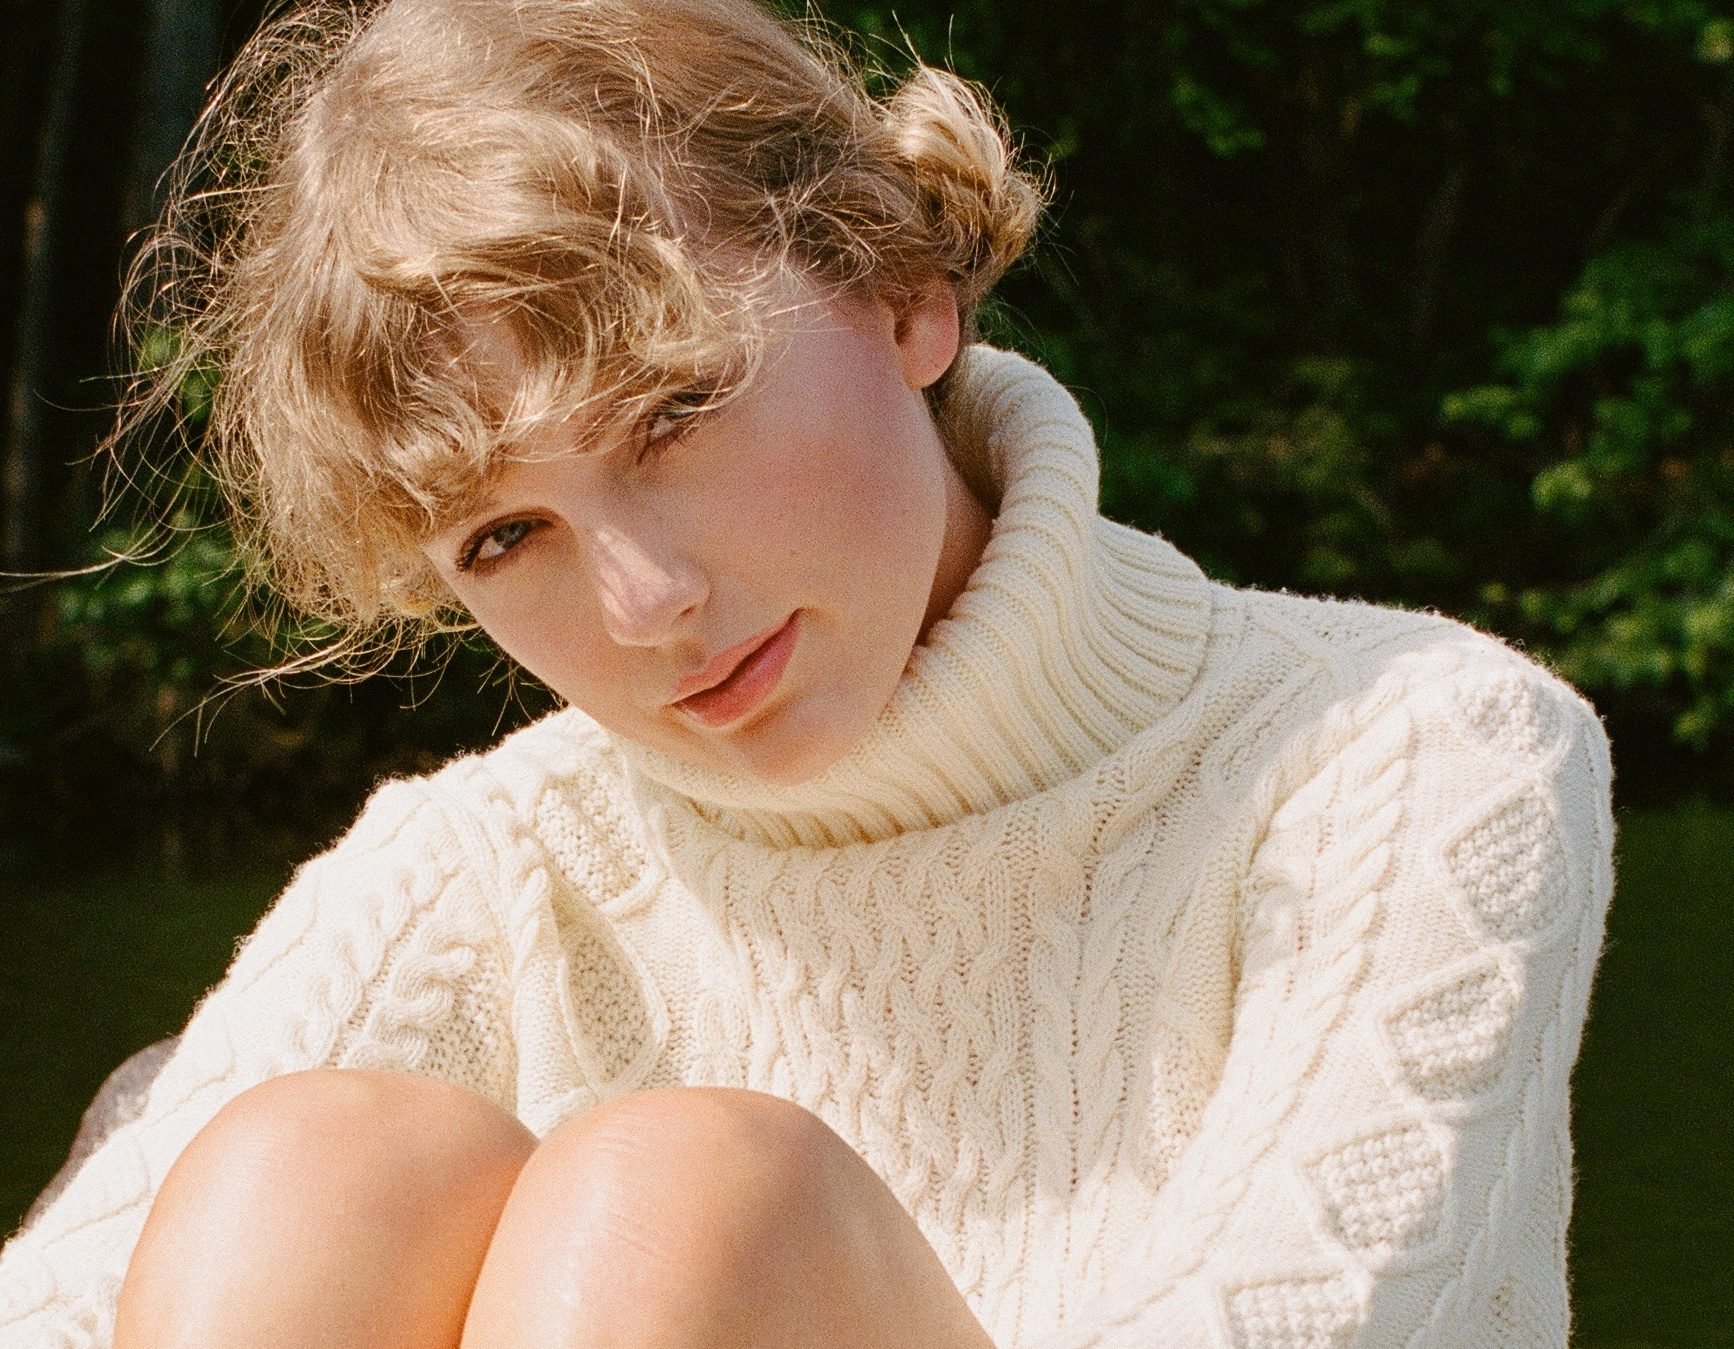 Taylor Swift poses for 'Folklore' promotional artwork